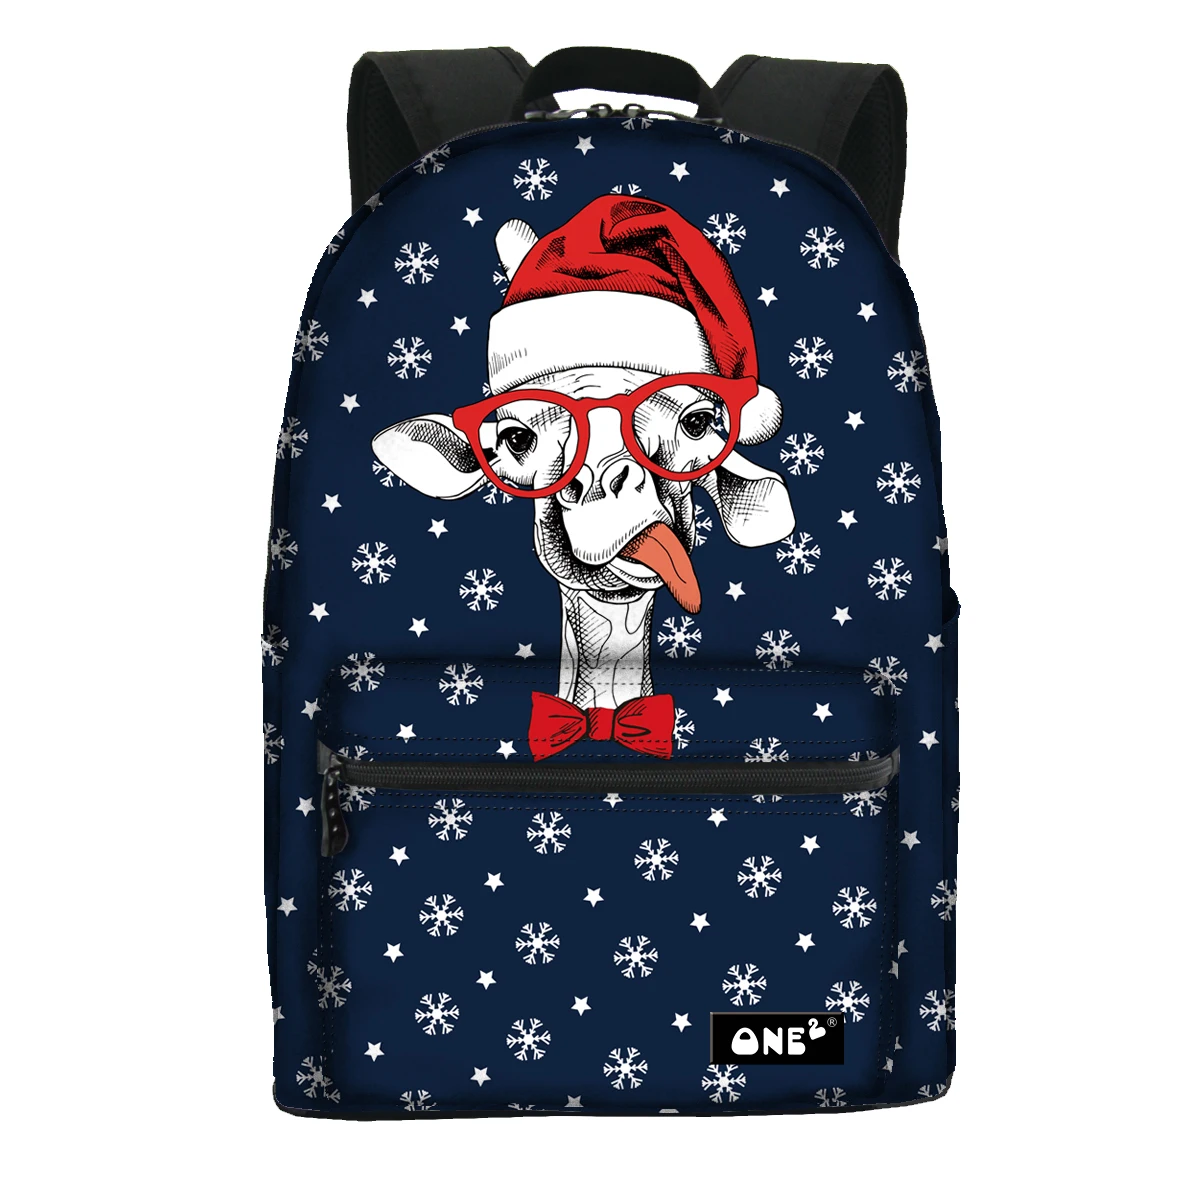 

Winter reindeer print college school backpack for student lightweight eco friendly zipper sac a dos scolaire china factories, Customized